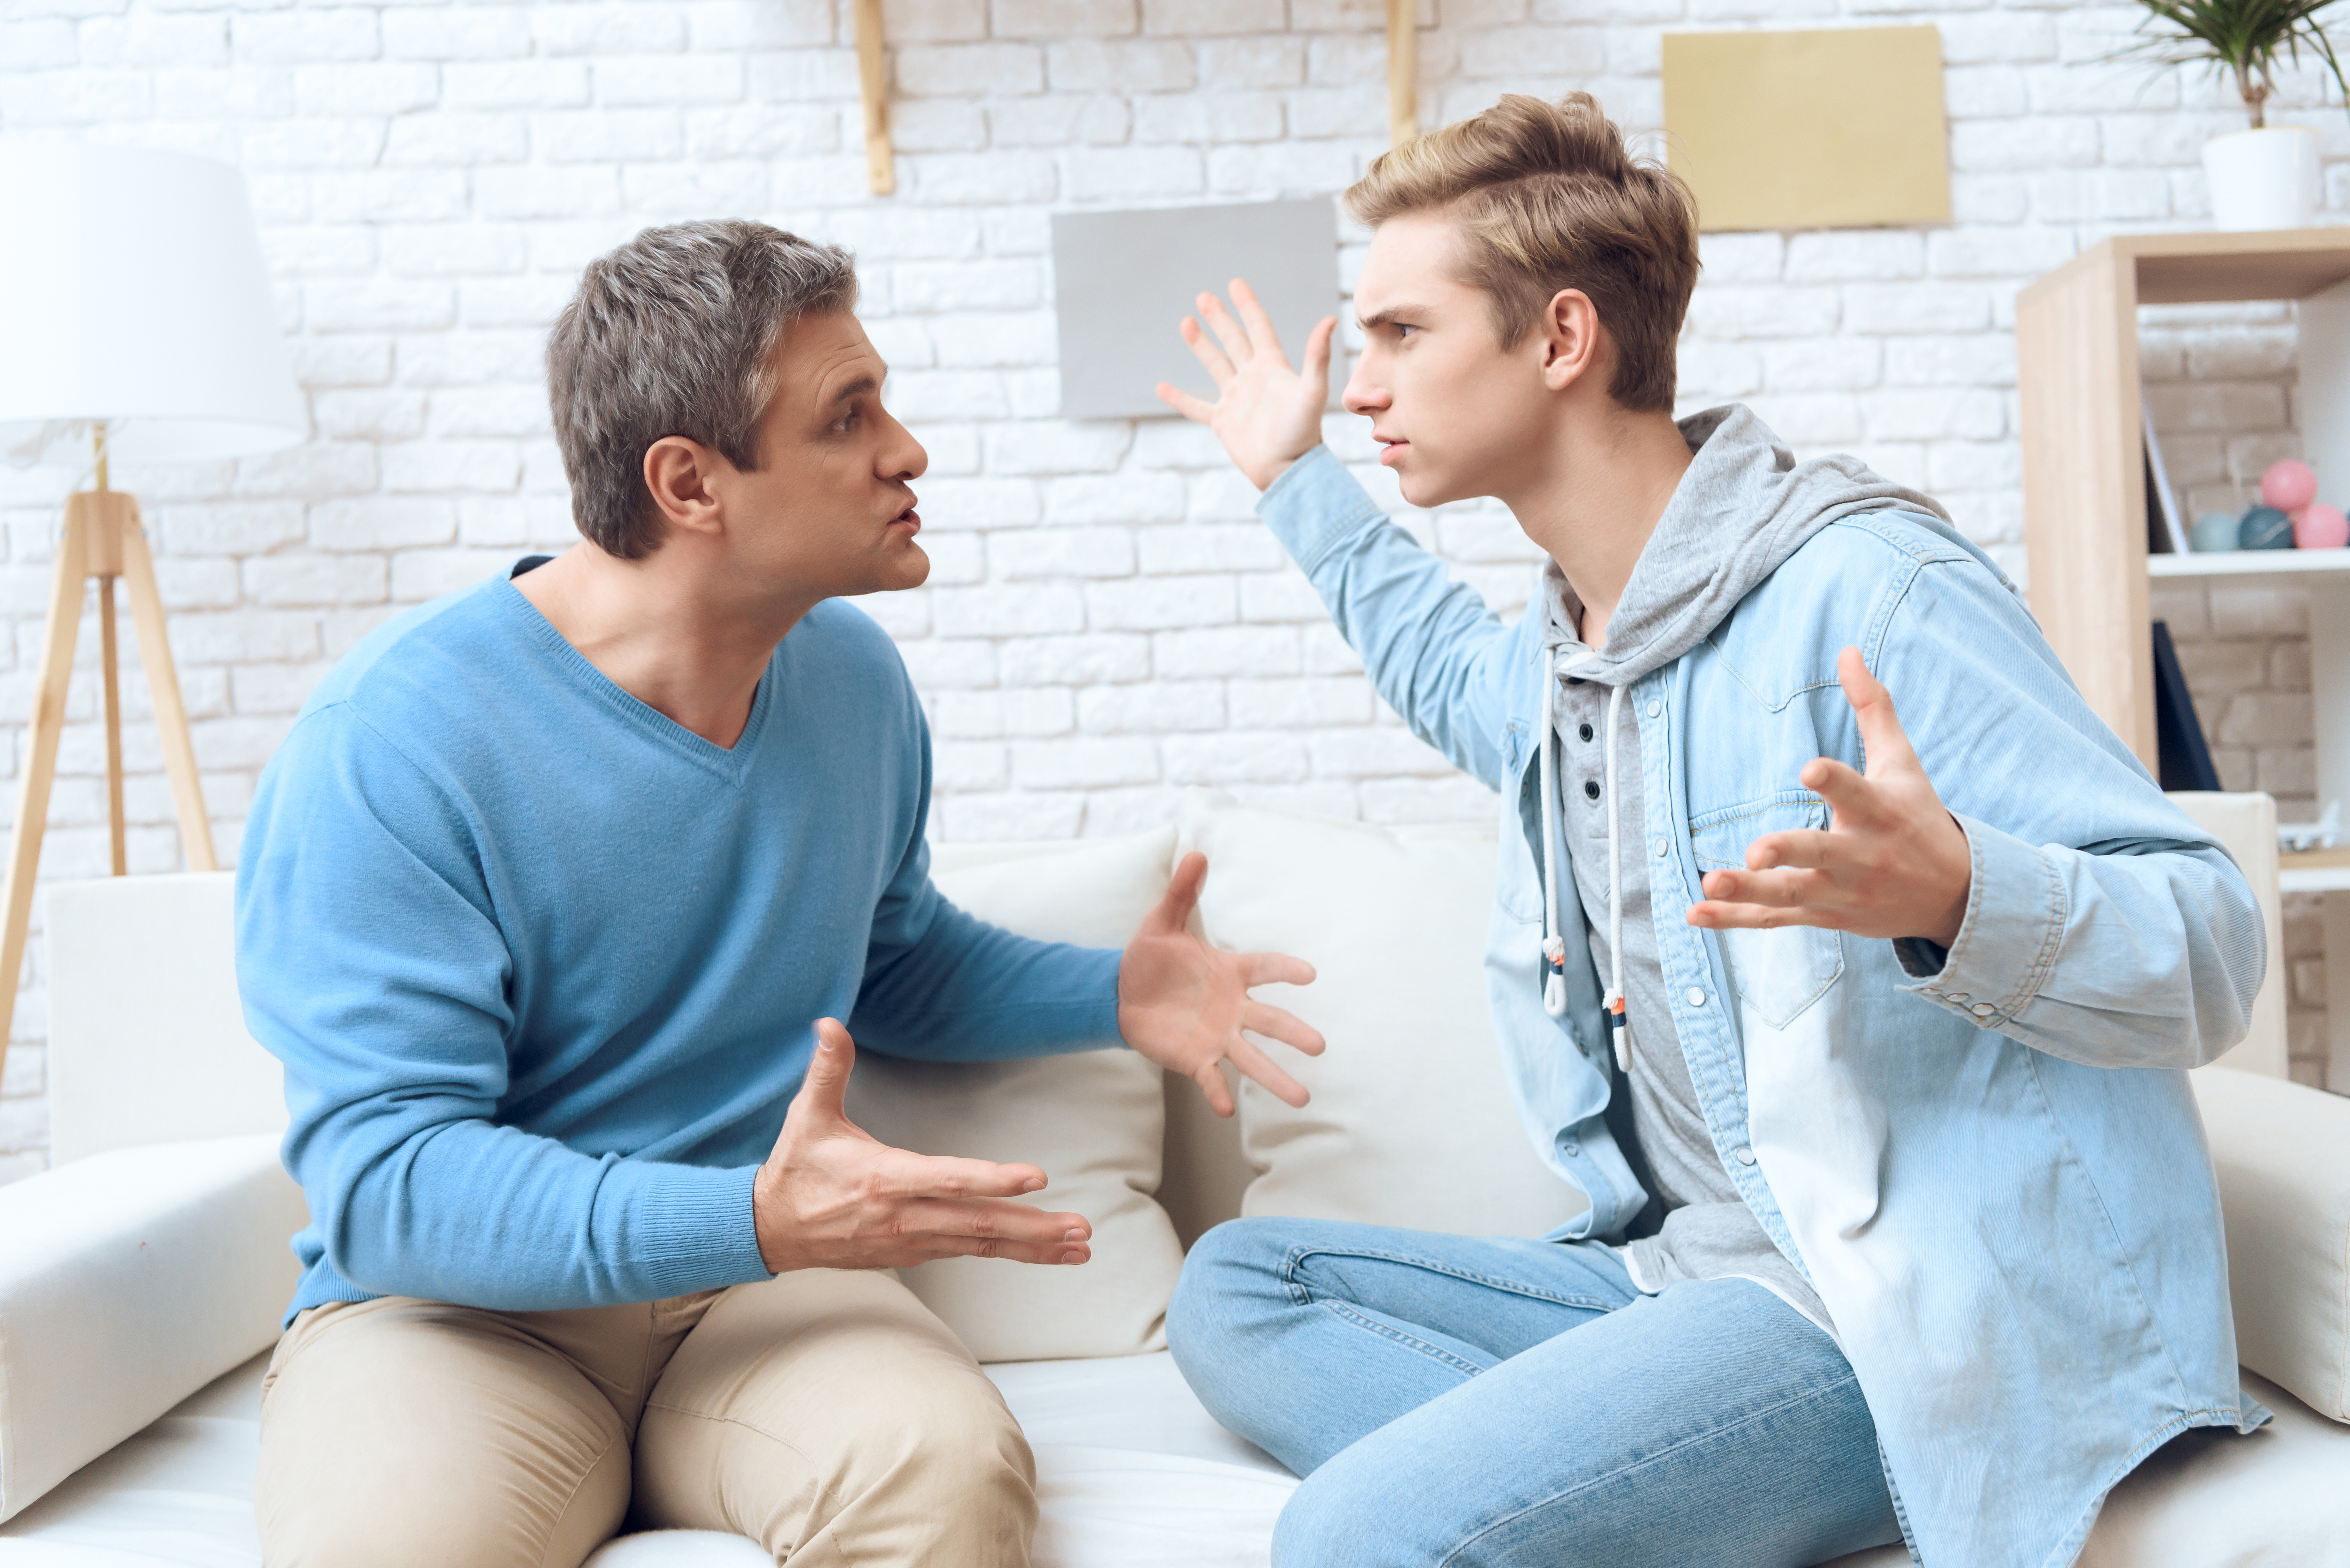 A father-son duo is pictured having an argument | Source: Shutterstock